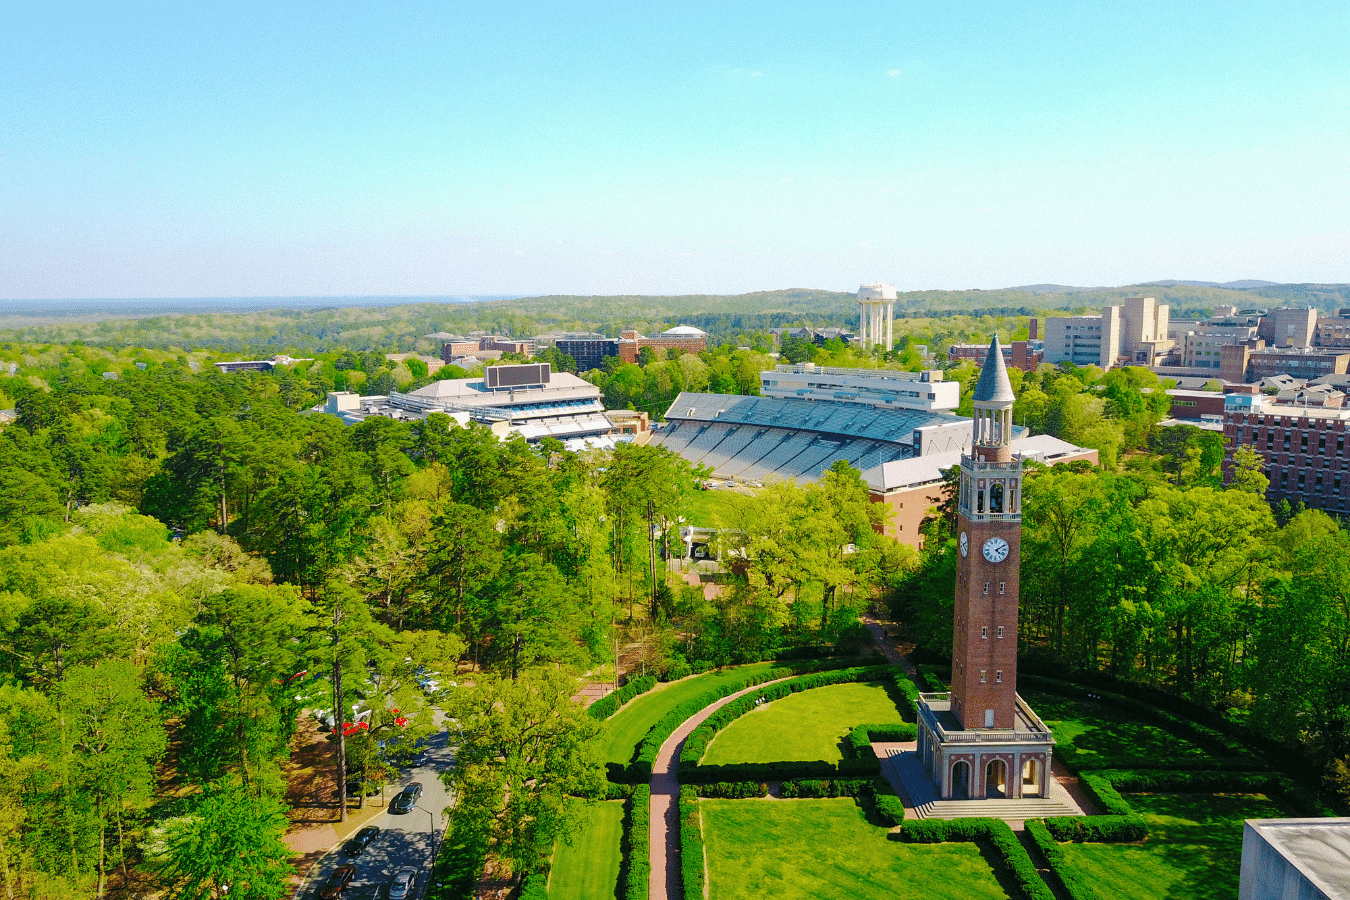 UNC - University of North Carolina is one of the landmarks of Chapel Hill, a true college town